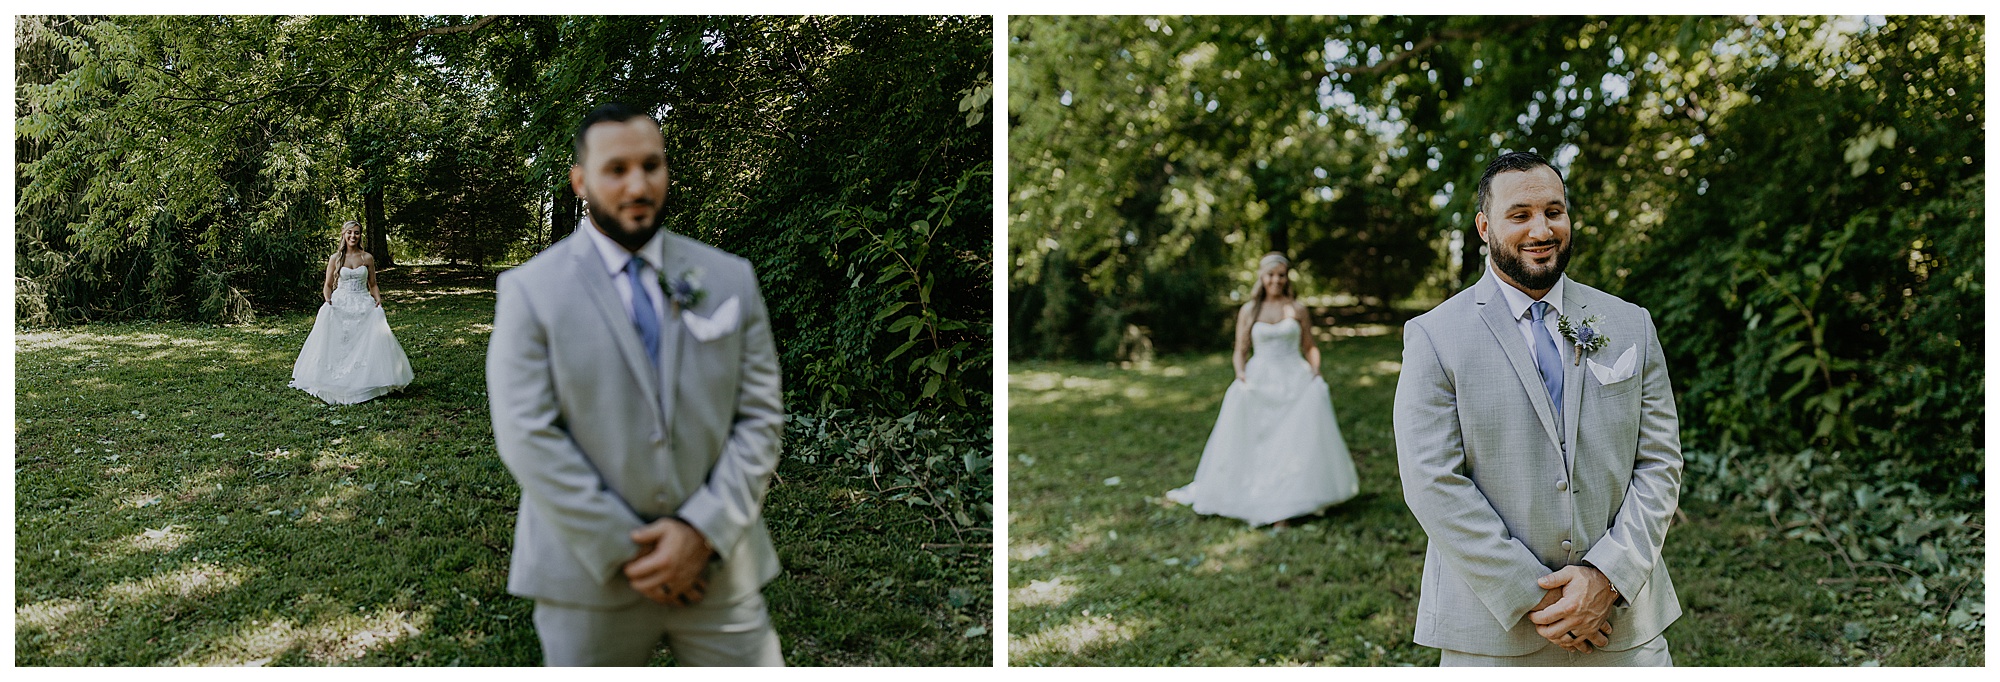 Scott and lauren's first look and Lauren is walking up behind Scott at Cool Springs House.